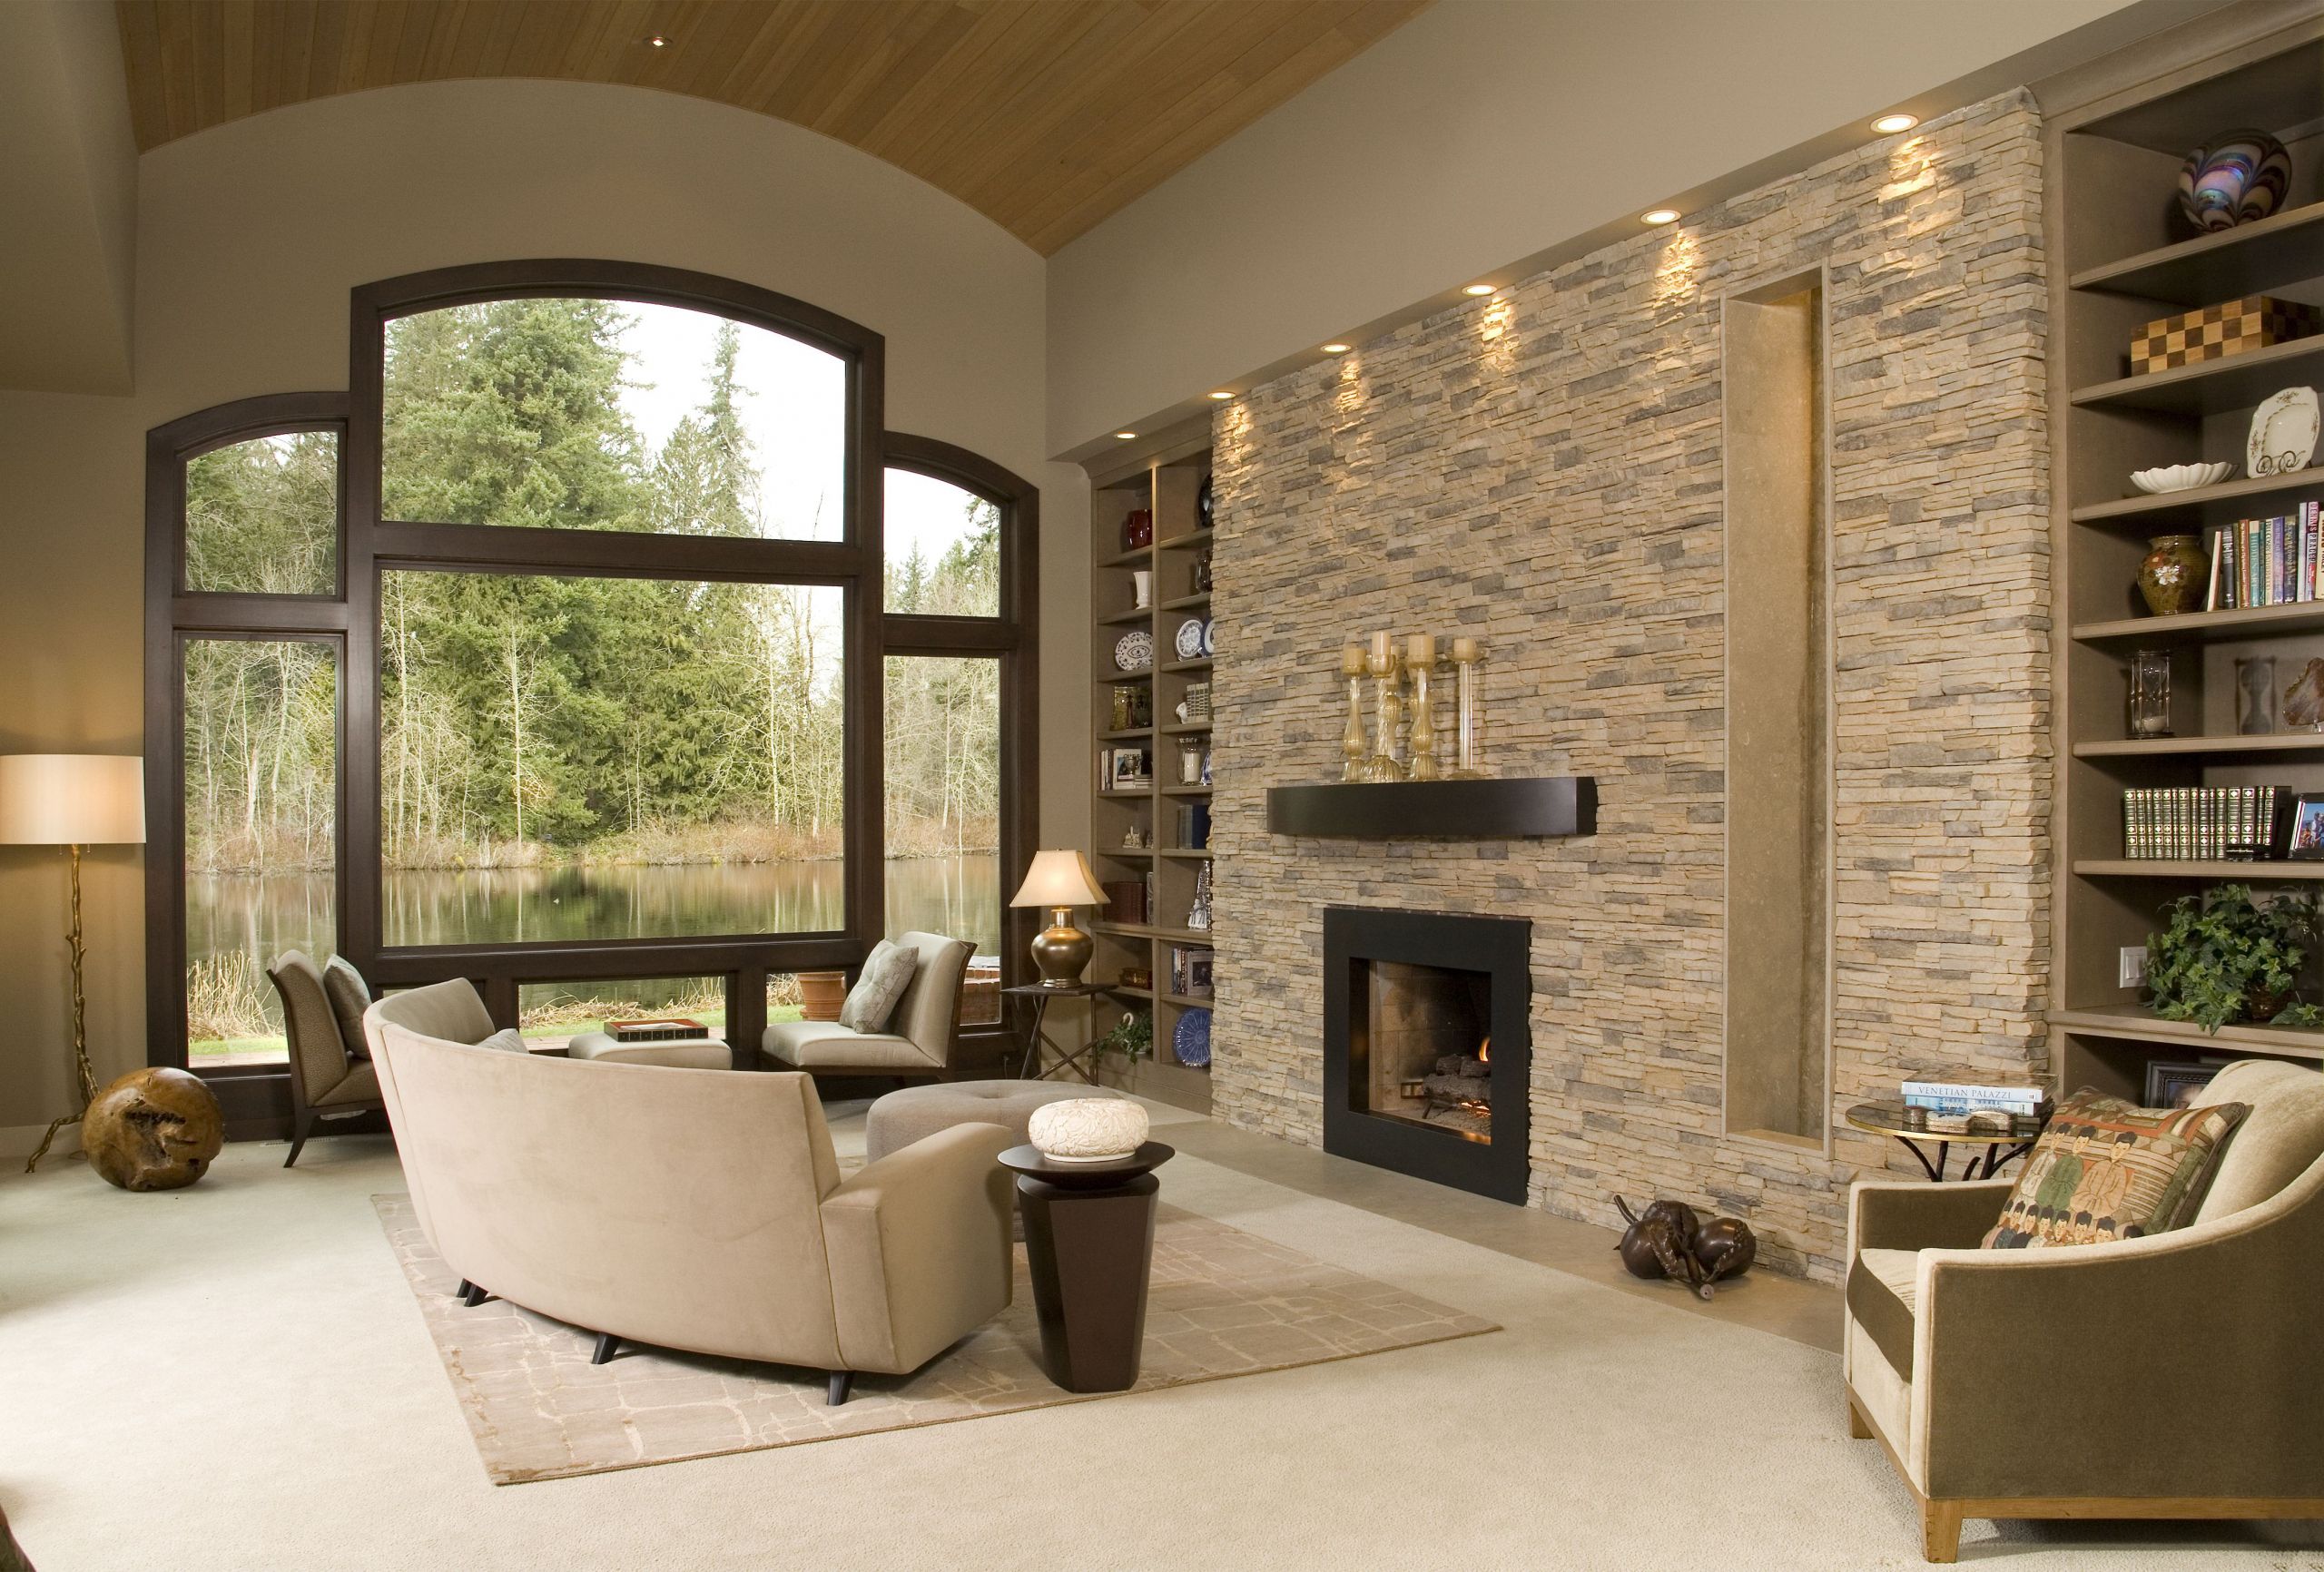 Stone Accent Wall Living Room
 Eldorado Stone Accent Wall Alderwood Stacked Stone